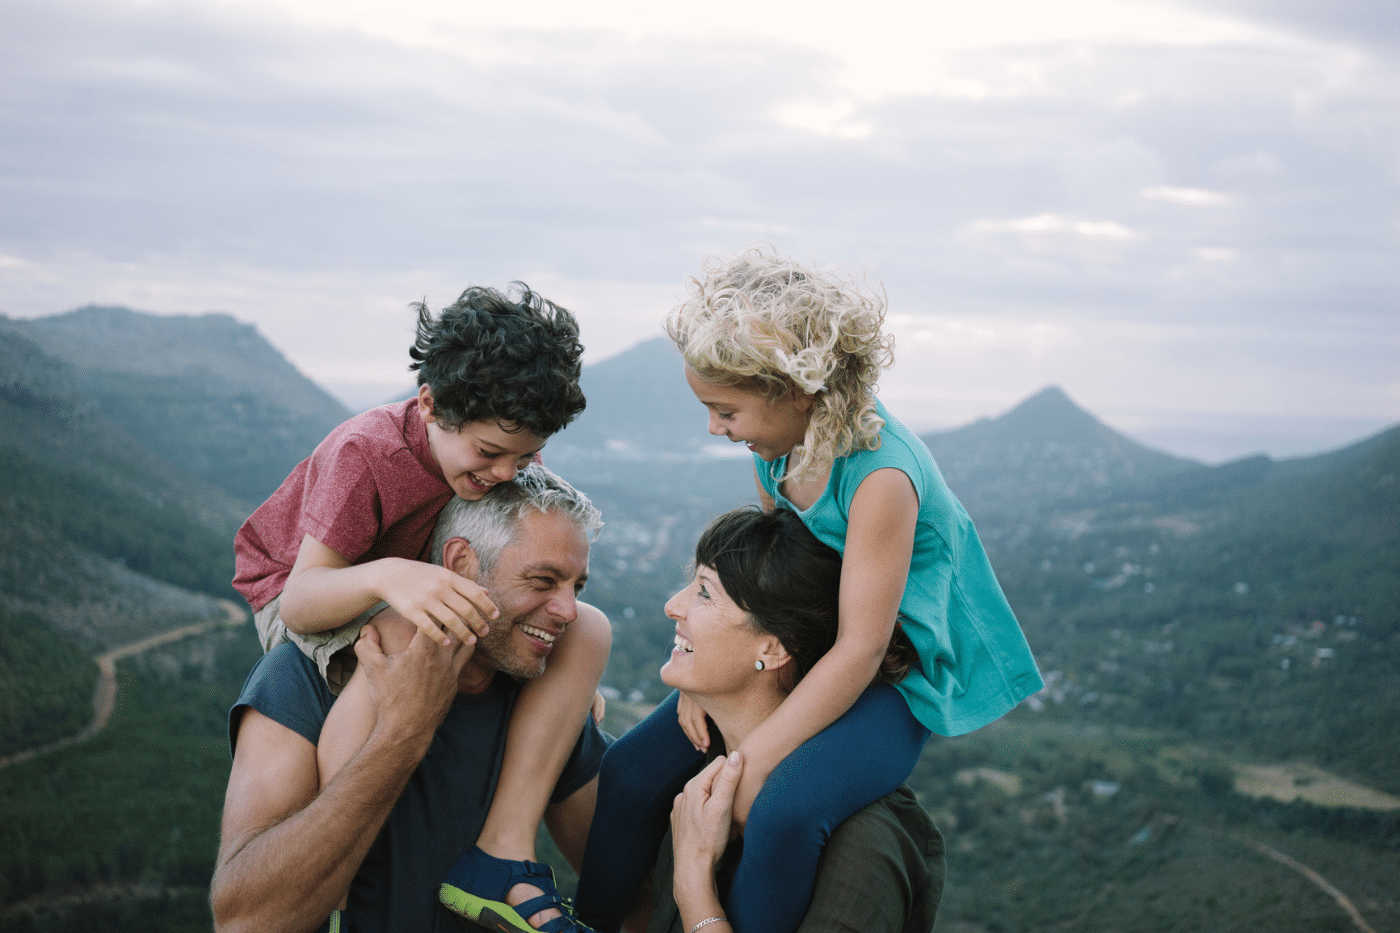 A family has some fun while on a hike in the mountains